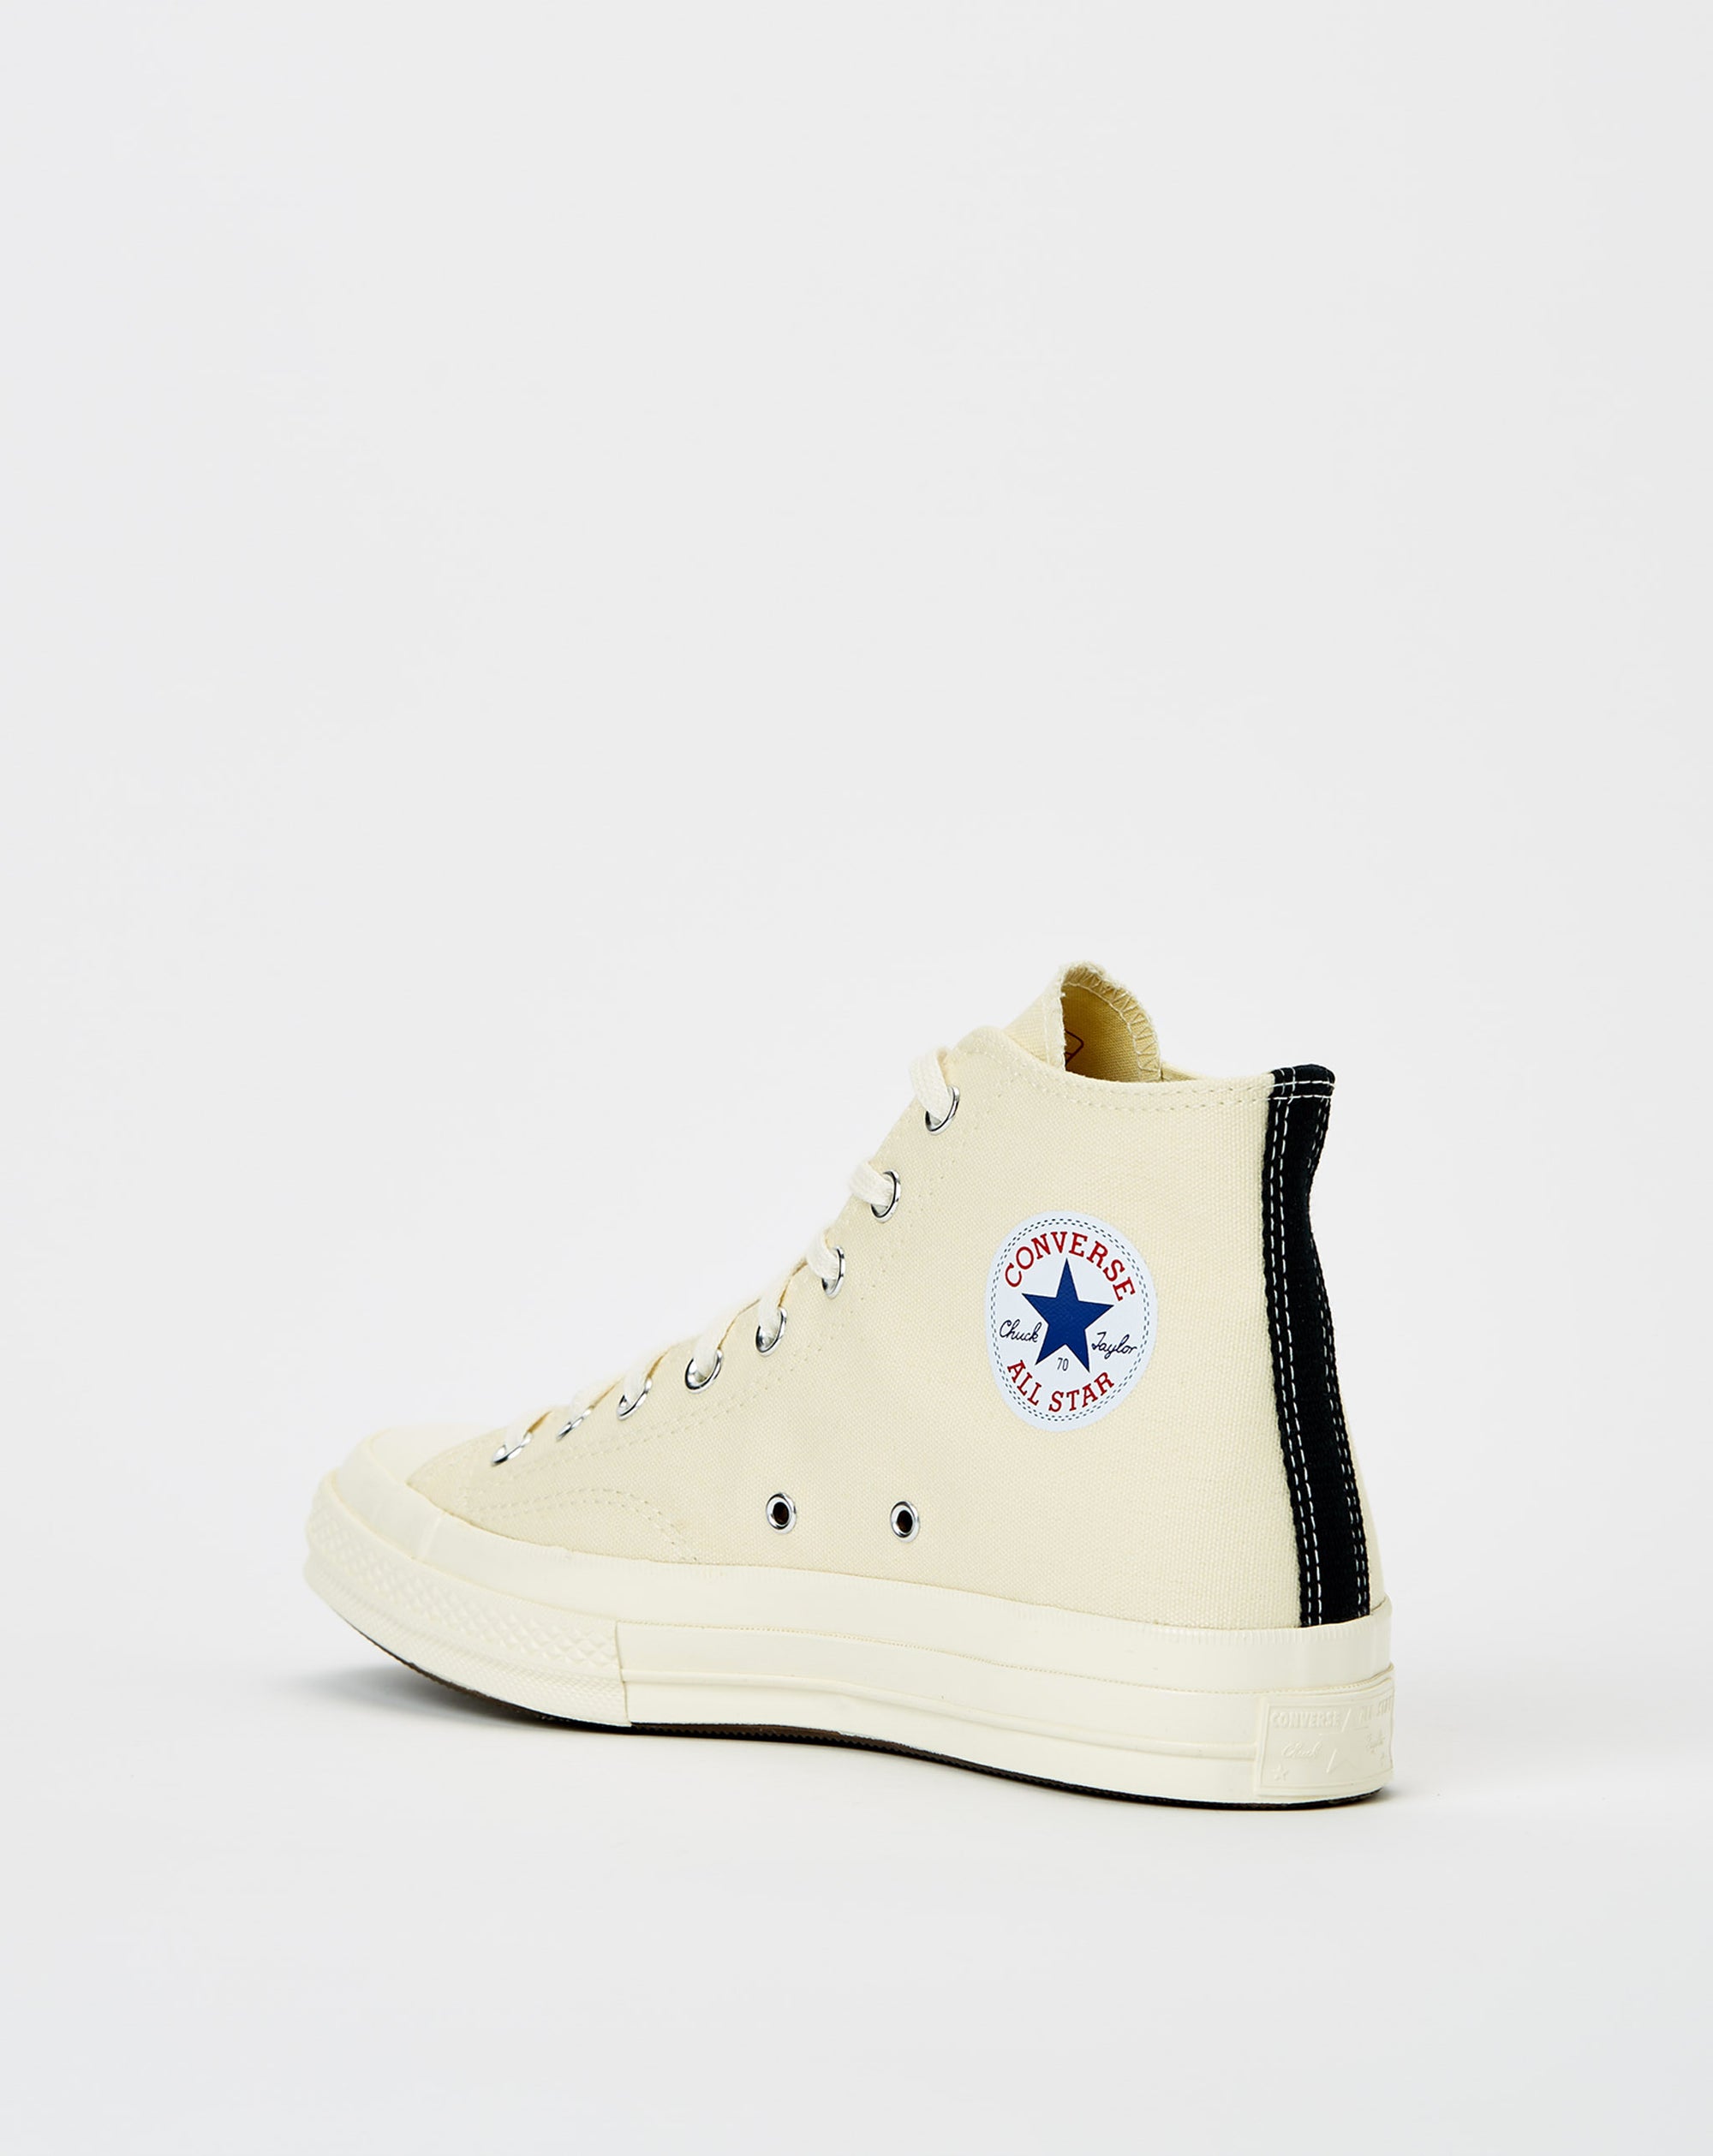 - Comme Des Garcons Play x Converse Chuck Taylor 1970 High - Beige: 150205C Rule of Next